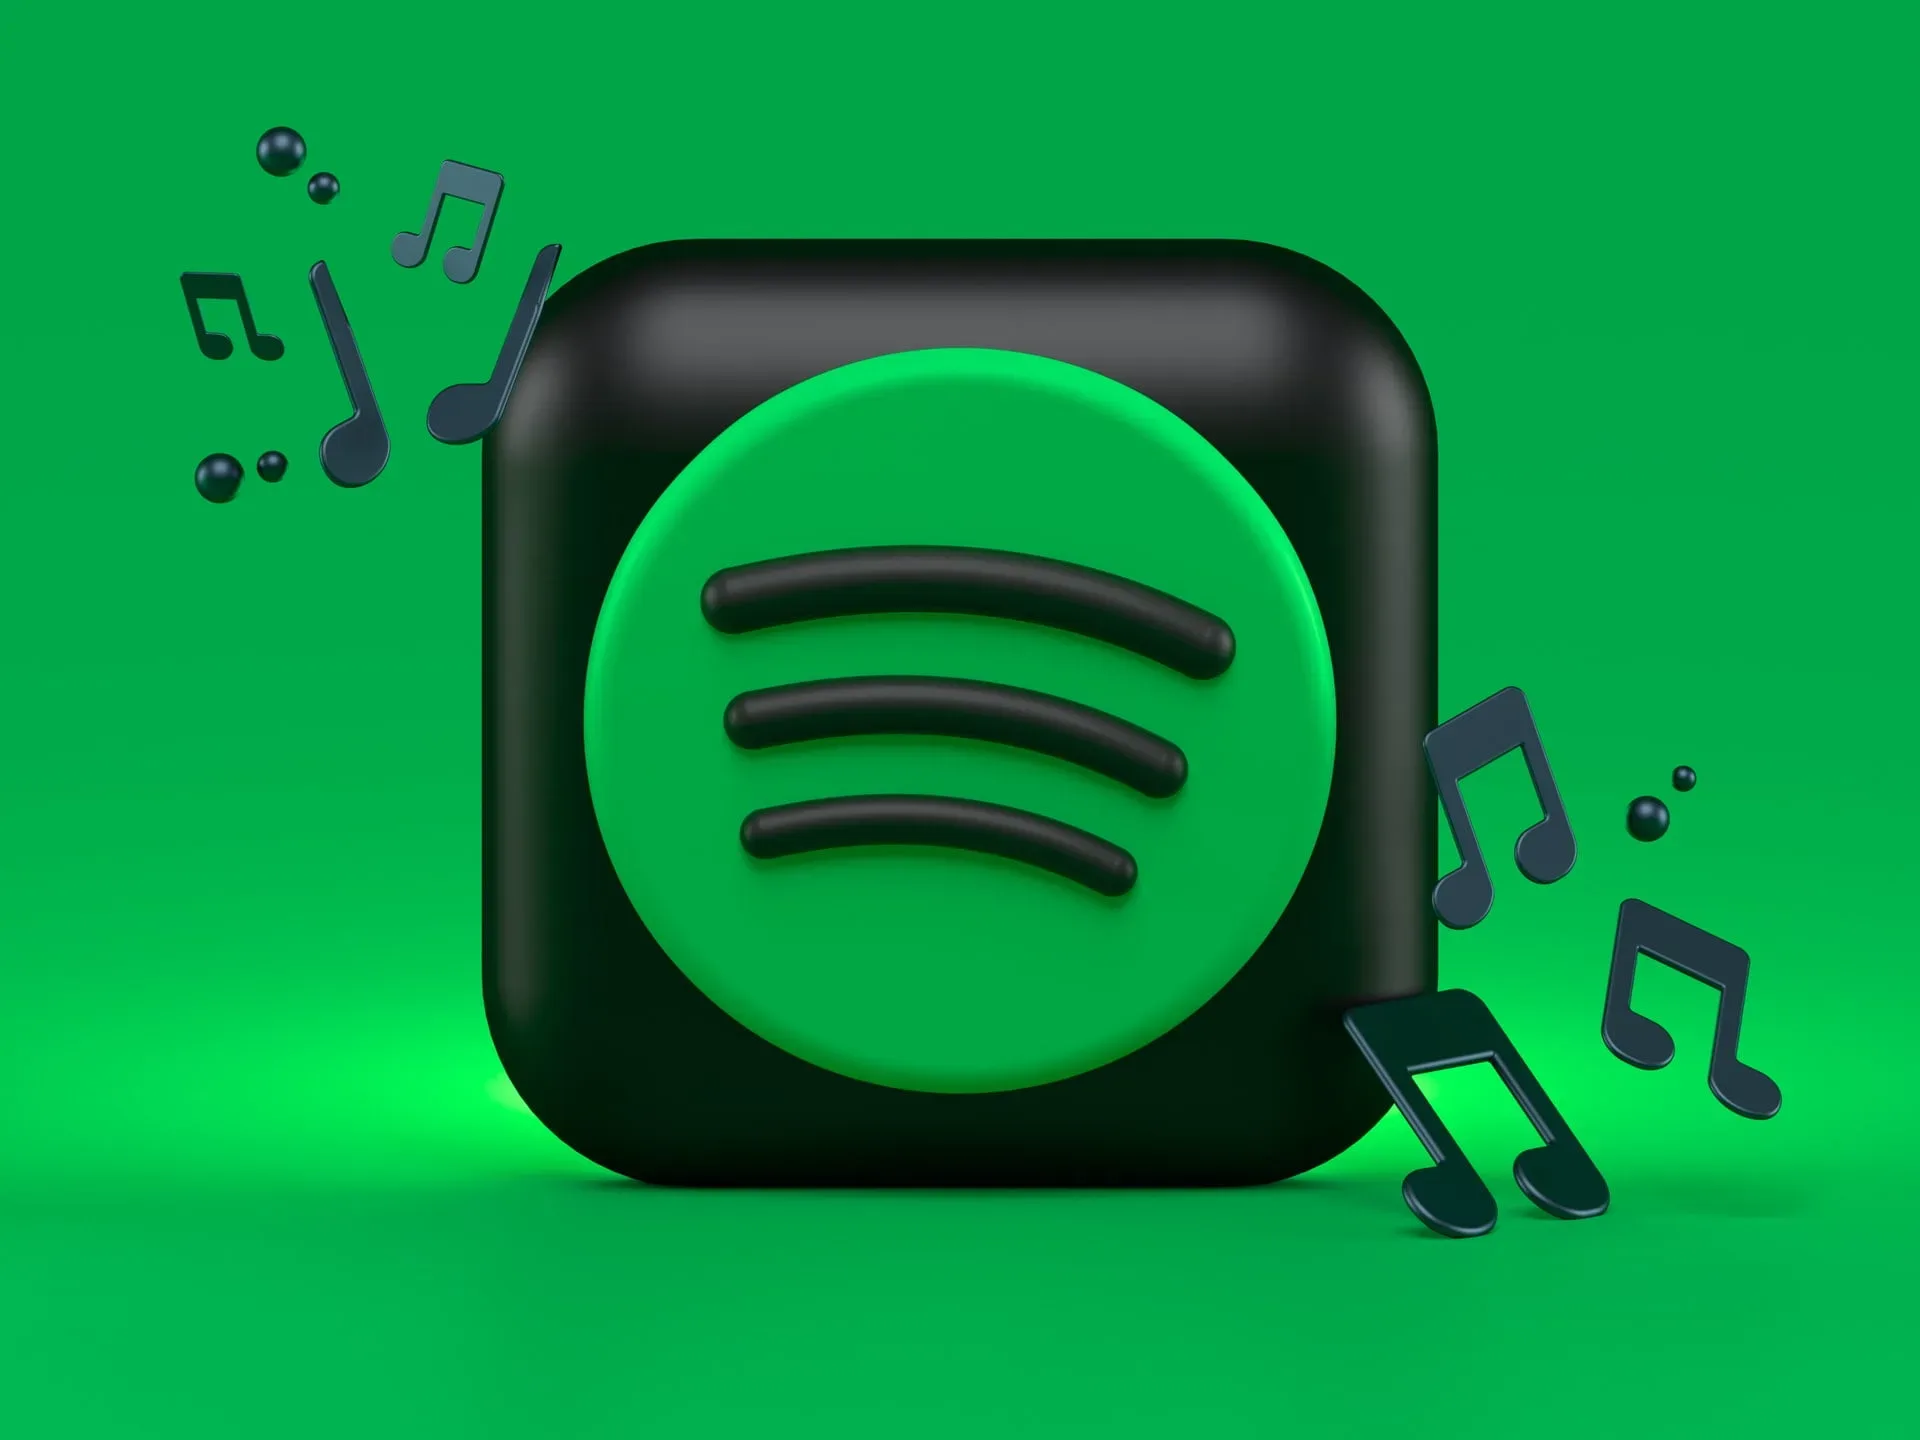 Spotify Brings ‘Hey Spotify’ Voice Command To Manage App Without Hands